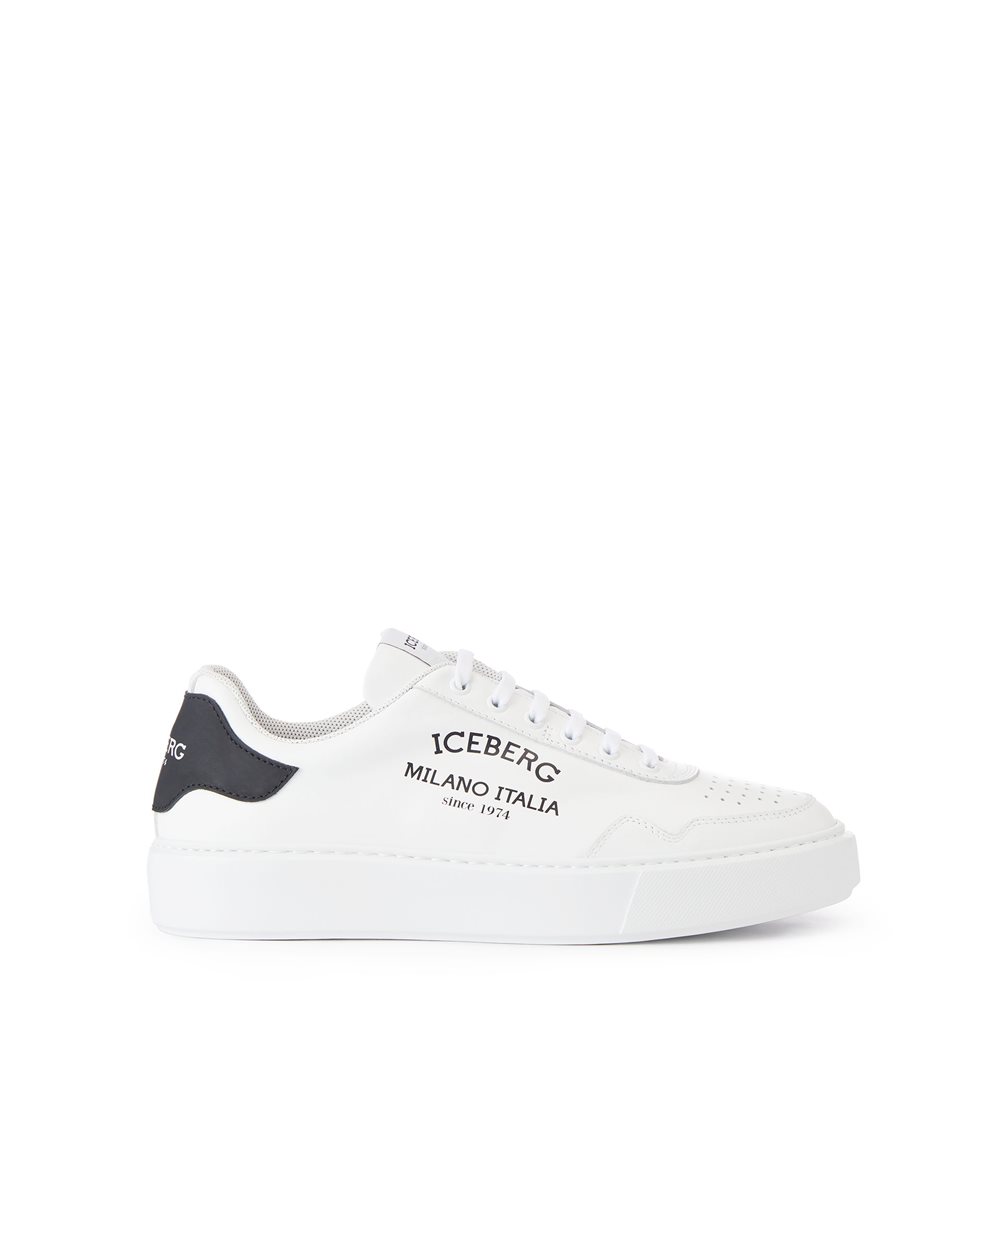 Carson sneakers with logo - Shoes & sneakers | Iceberg - Official Website